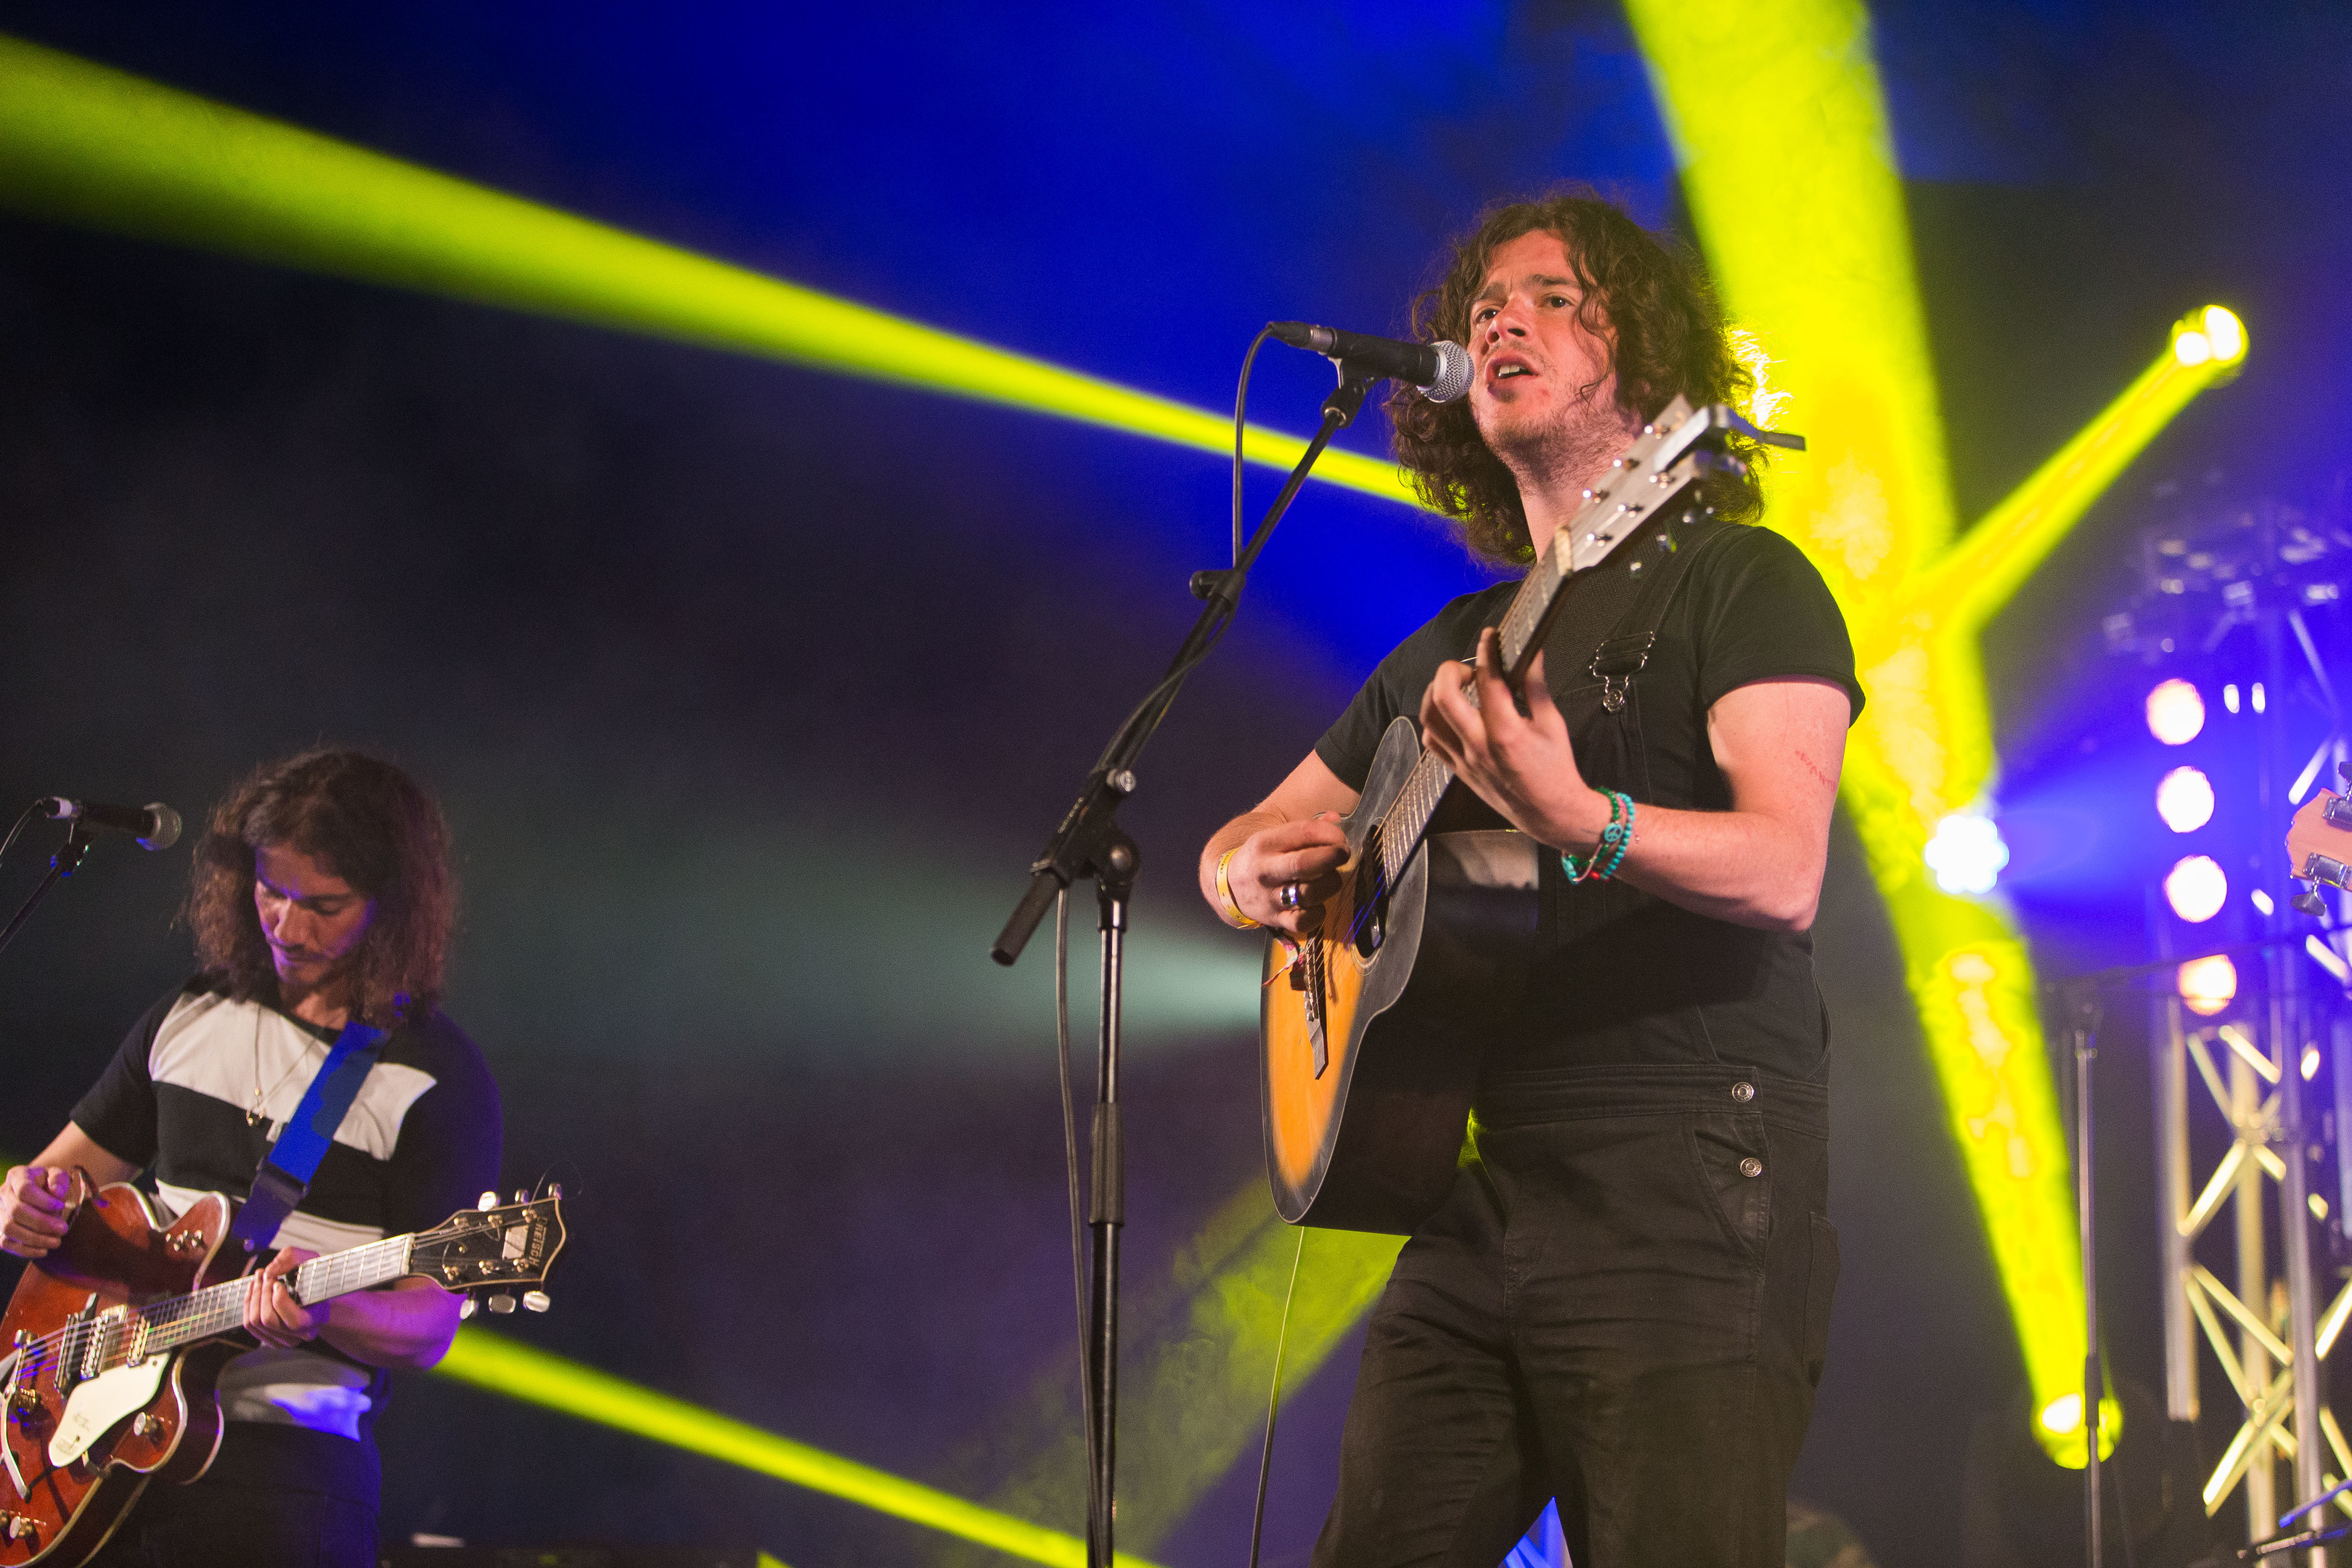 The Kyle Falconer band performing at last summer's Carnival 56 in Camperdown Park.